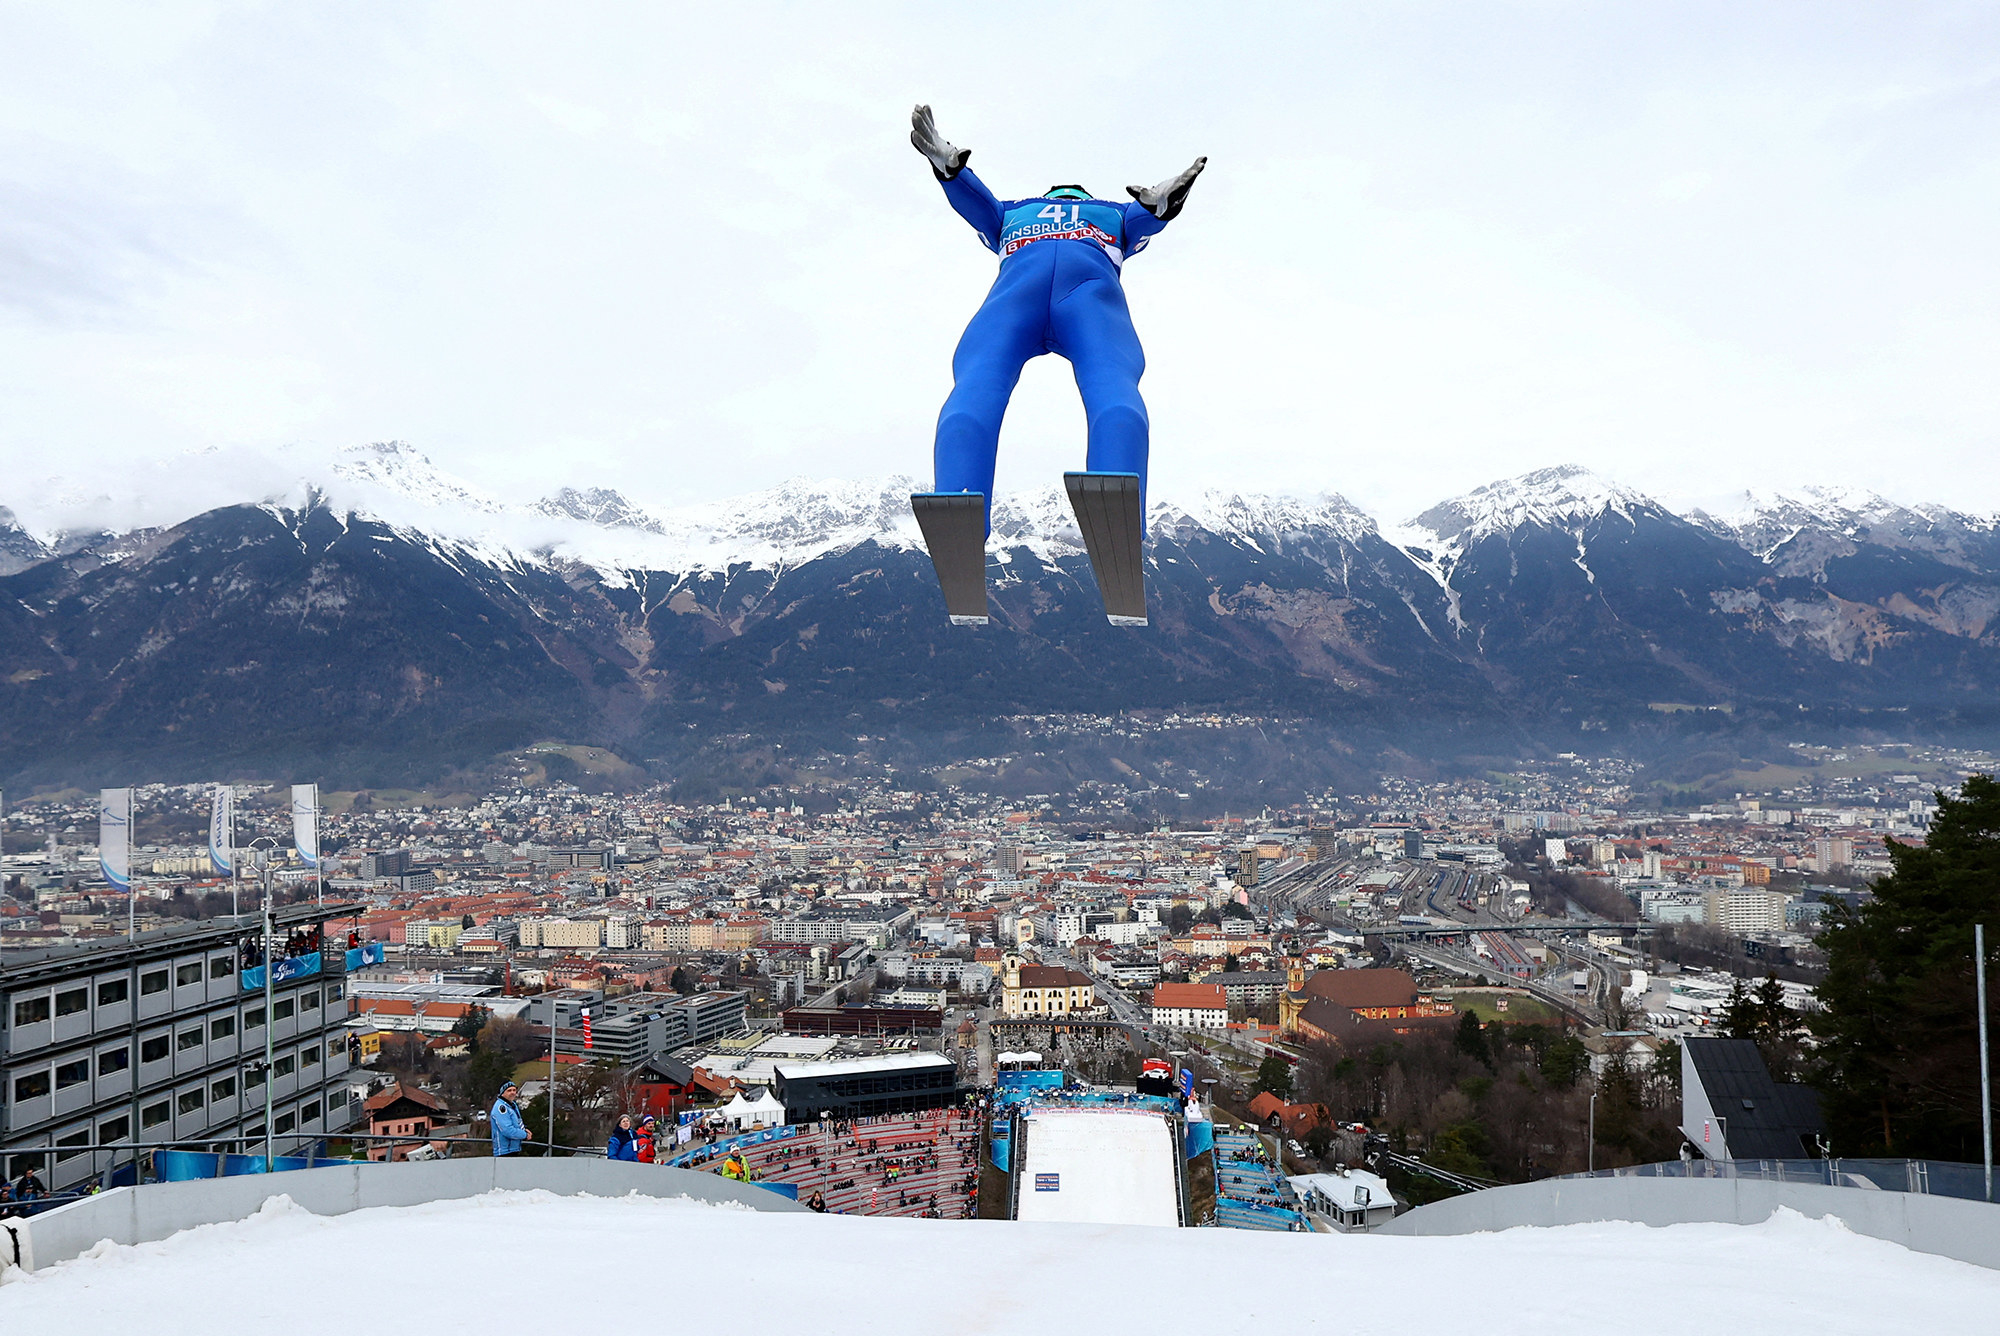 a man in a blue jumpsuit and skis jumps backwards; in the background are snowy mountains and a city